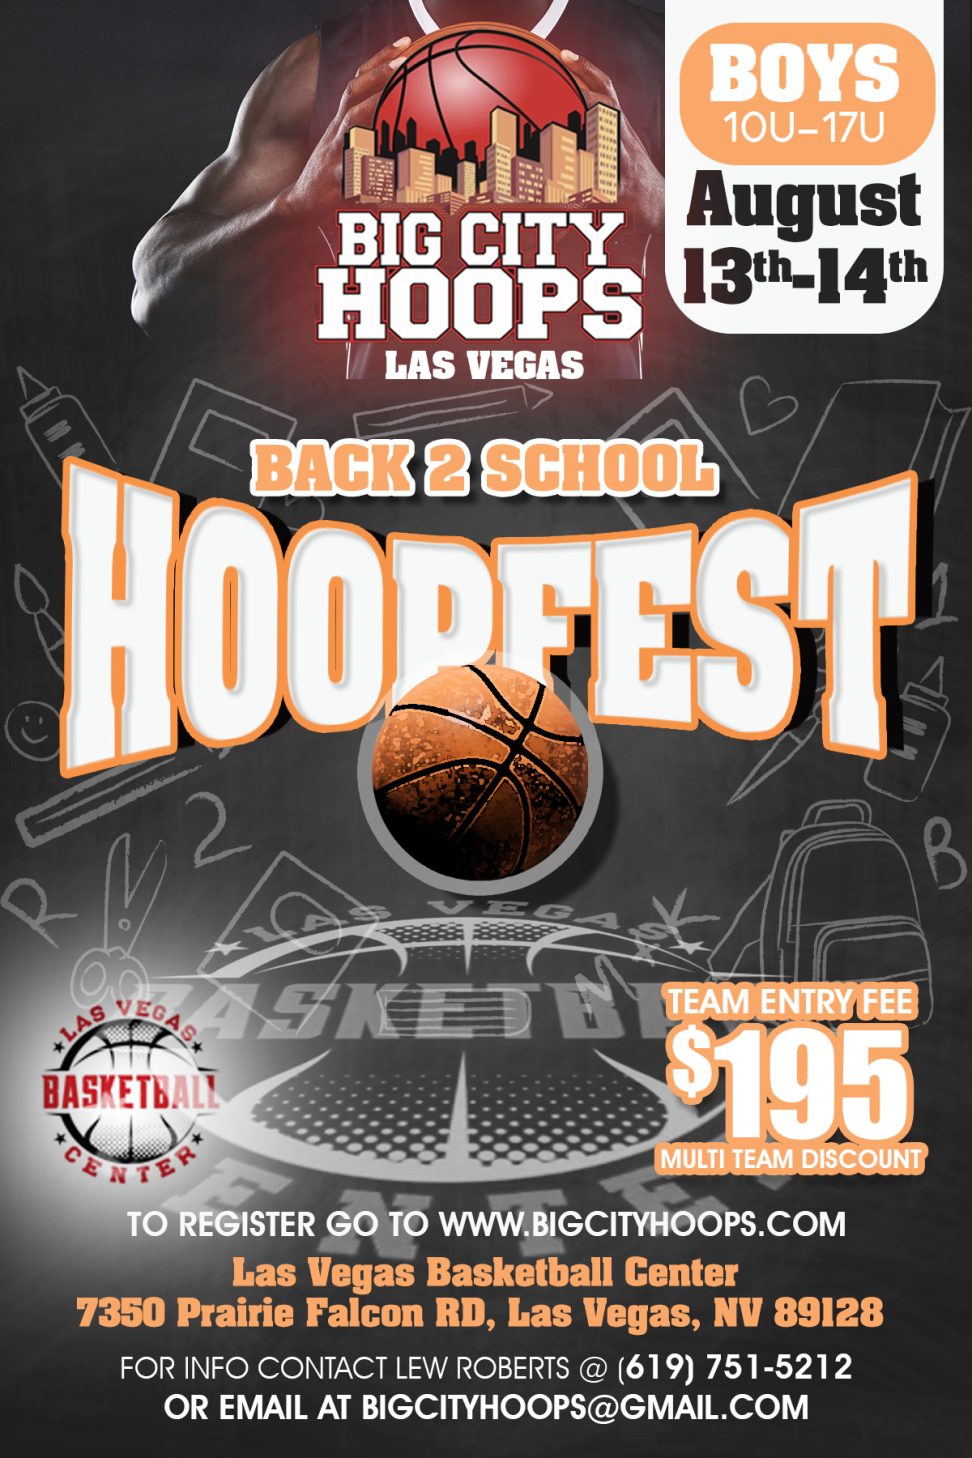 A poster for the back 2 school hooffest.